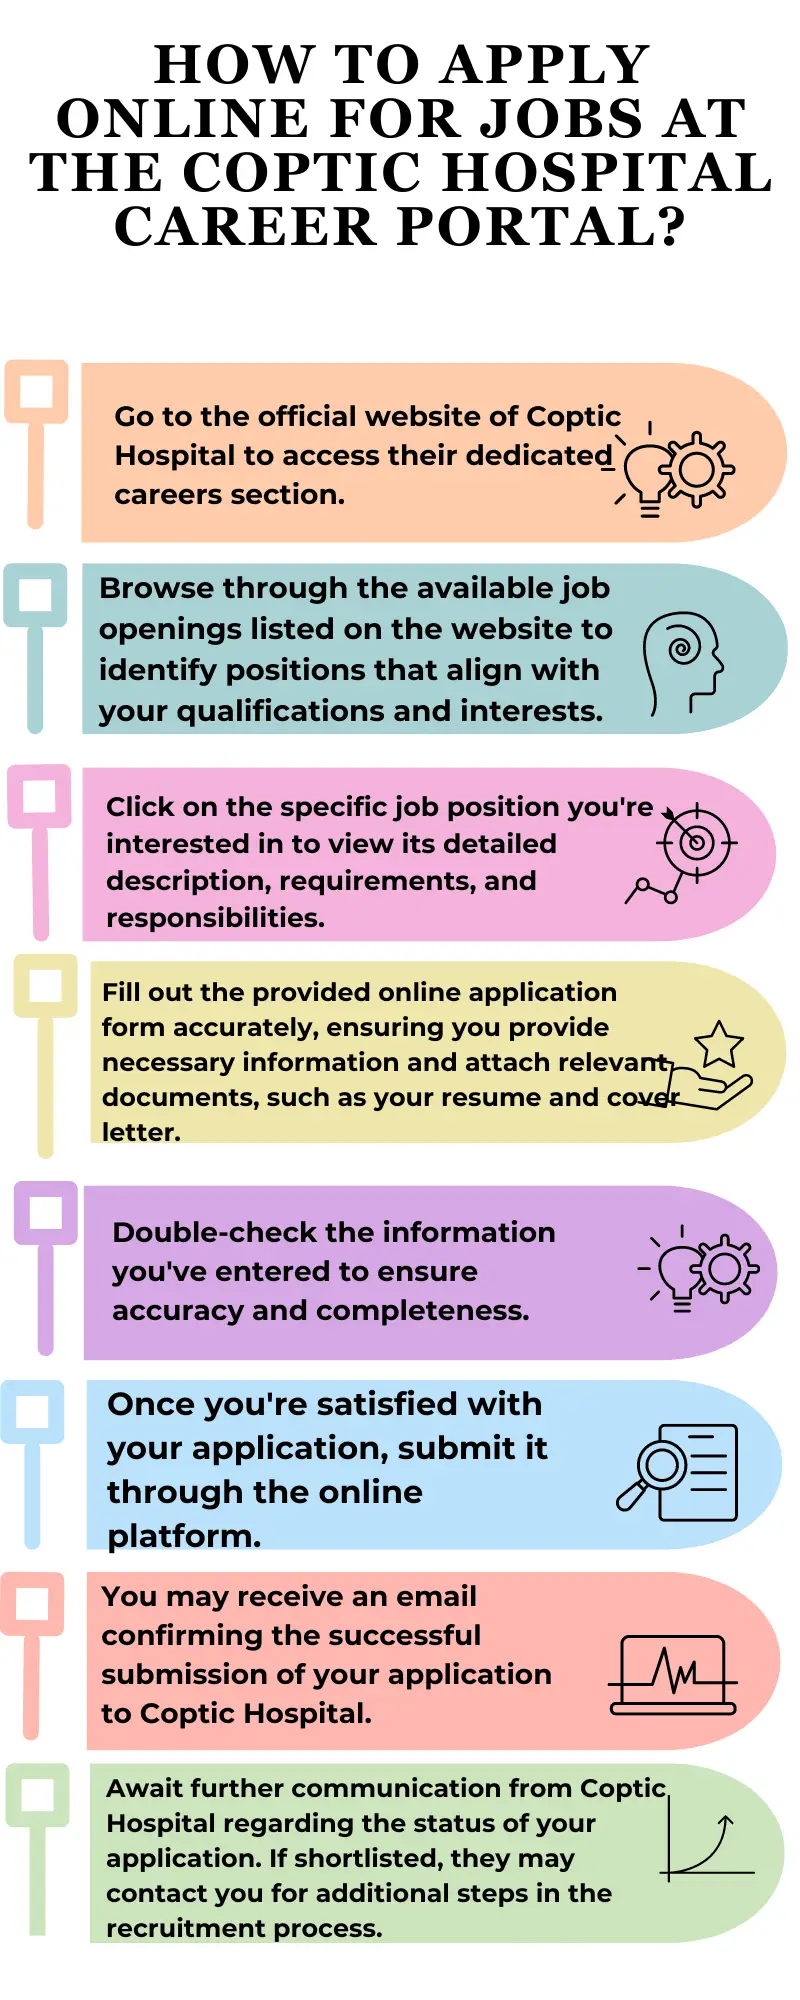 How to Apply Online for Jobs at the Coptic Hospital Career Portal?